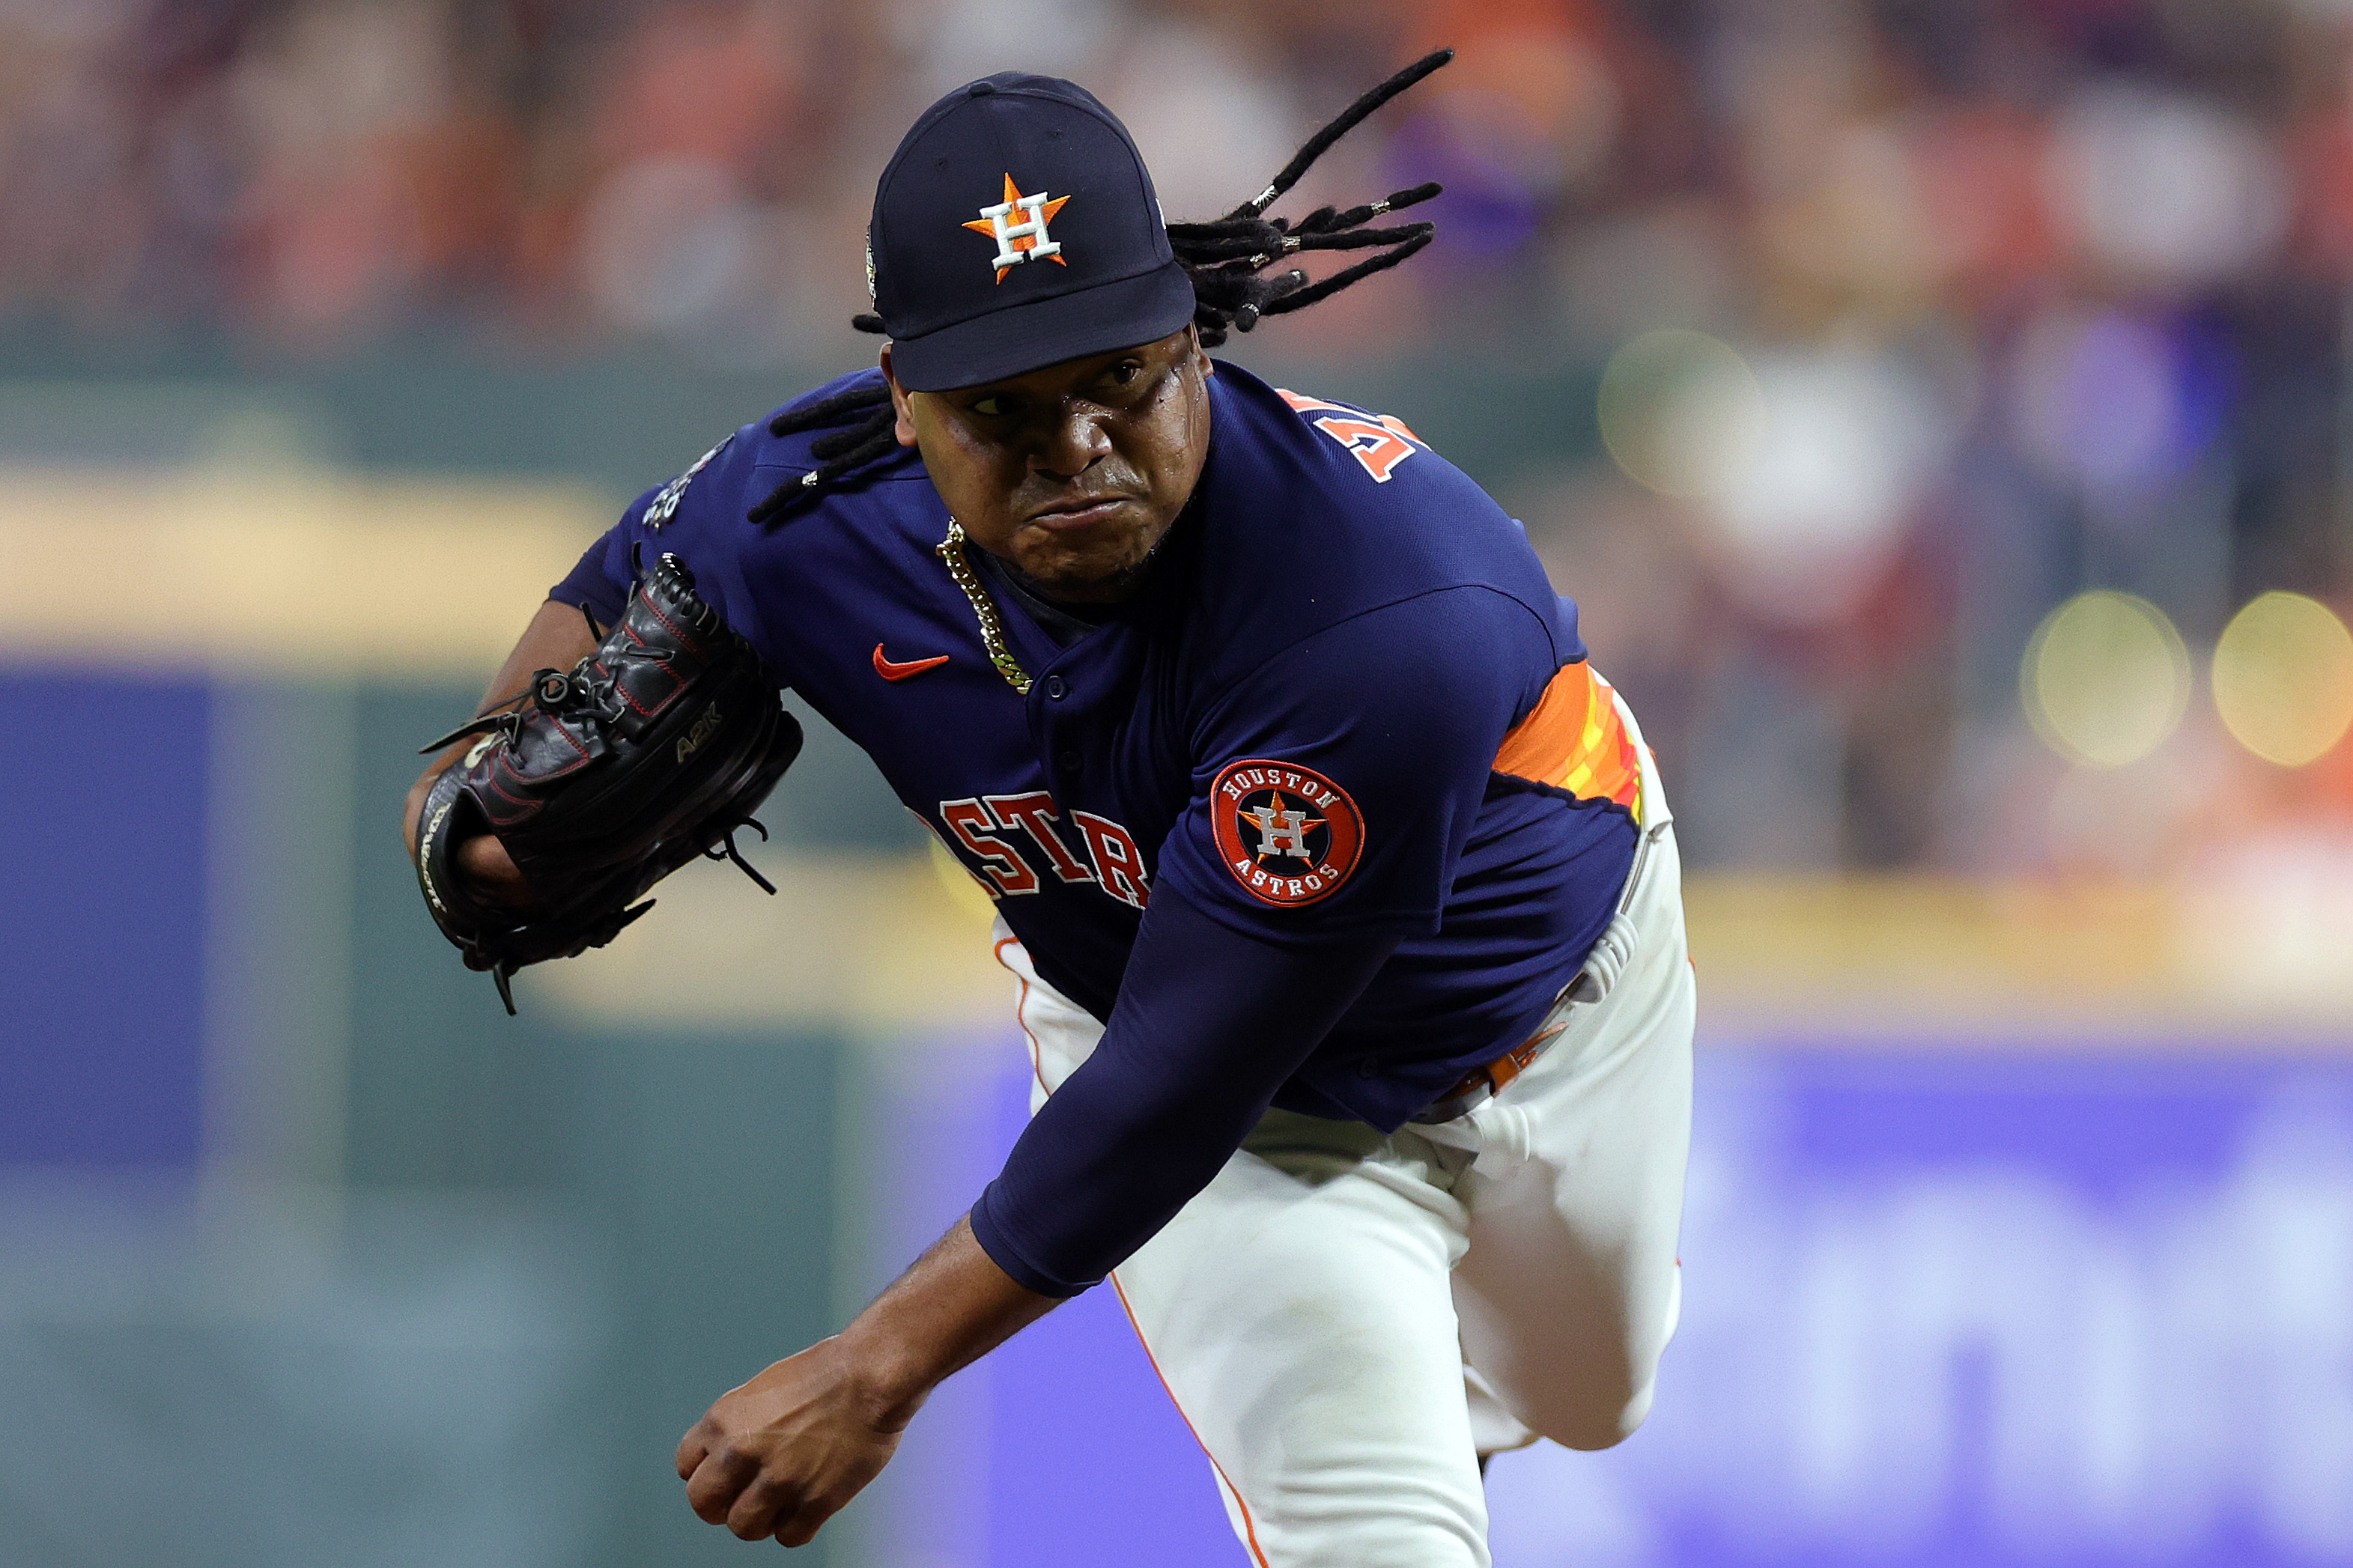 2022 World Series: How Framber Valdez led the Astros to a Game 2 win